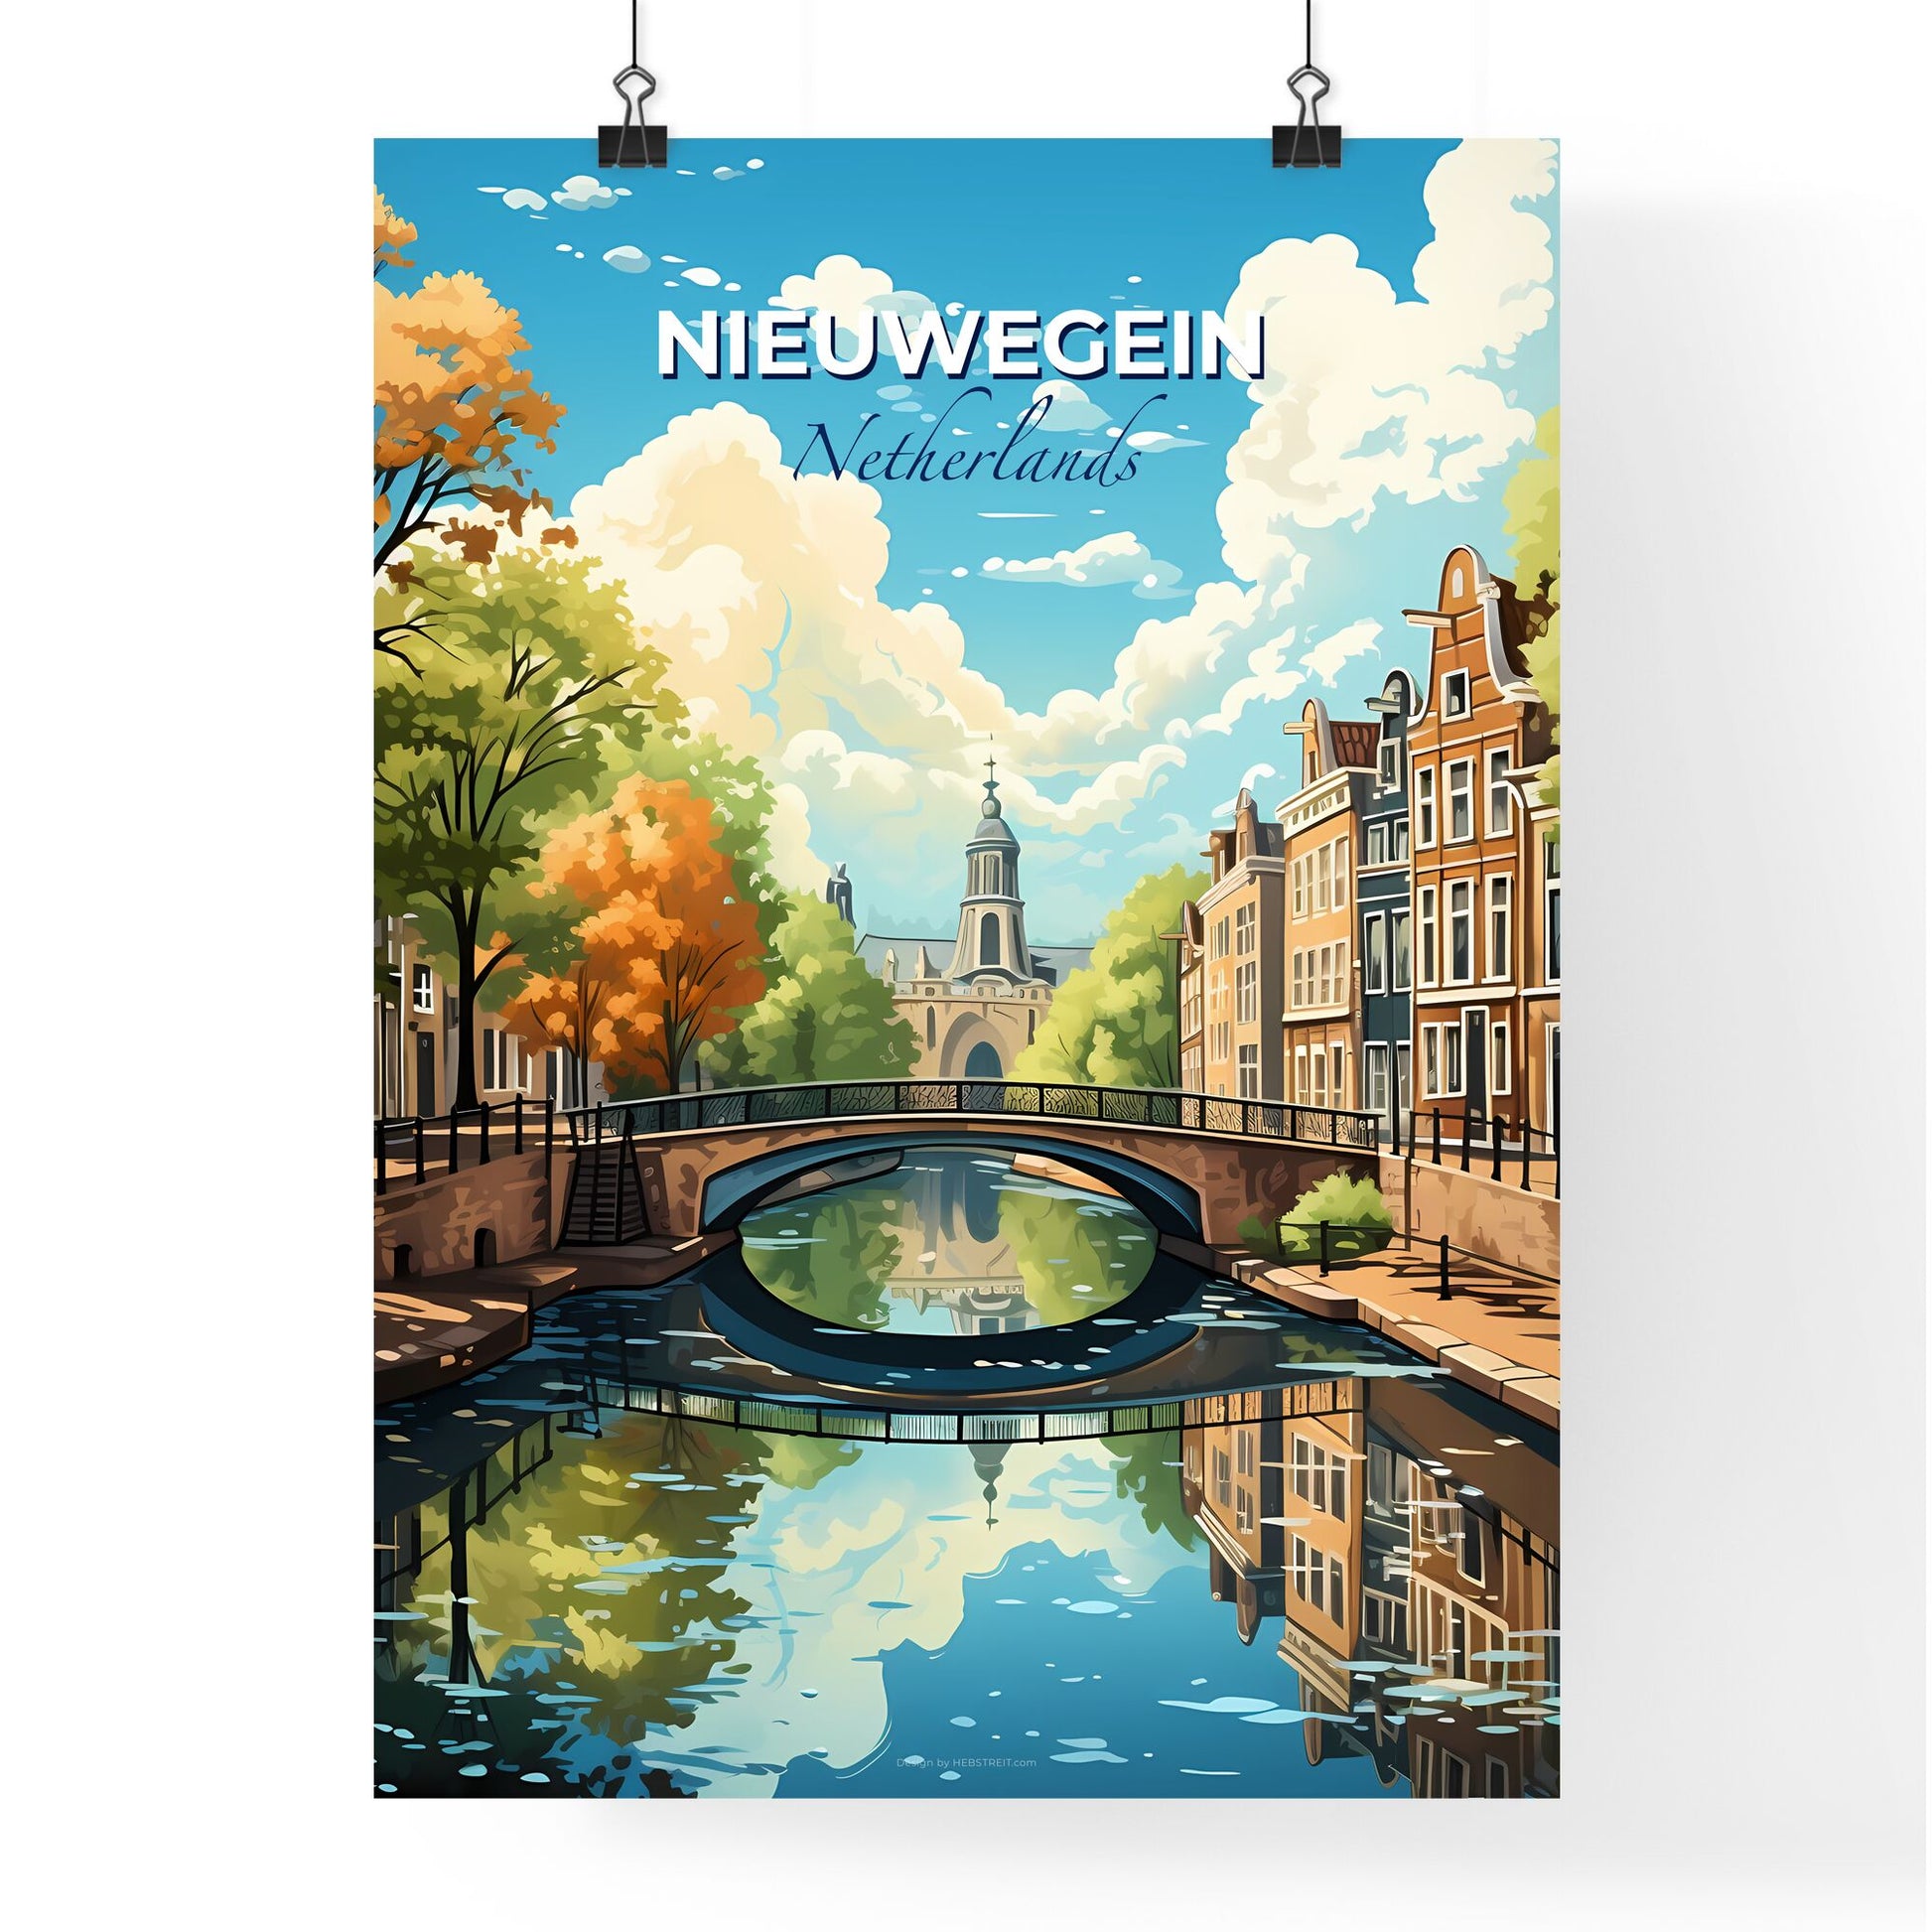 Nieuwegein, Netherlands, A Poster of a bridge over a river with trees and buildings Default Title